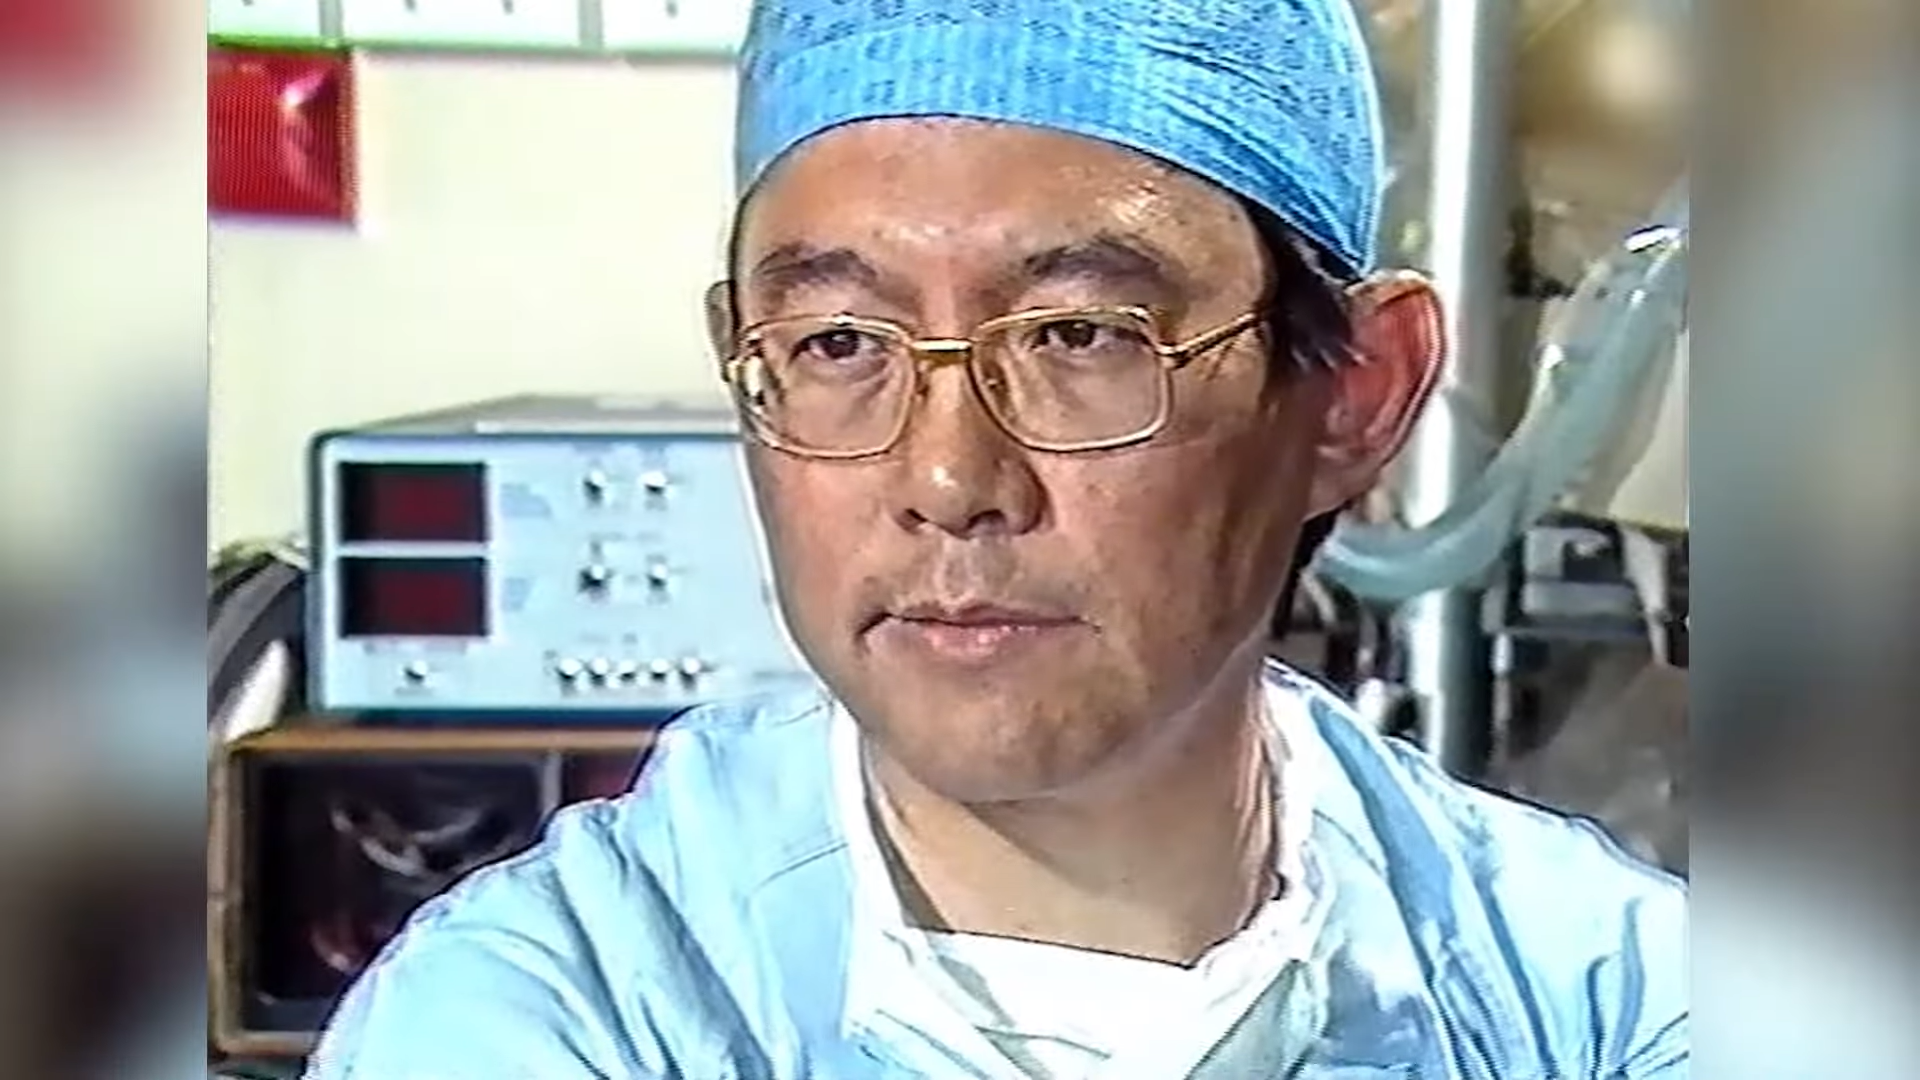 china, shanghai, australia, cardiology, google, who is dr victor chang, pioneering surgeon being honoured by google doodle